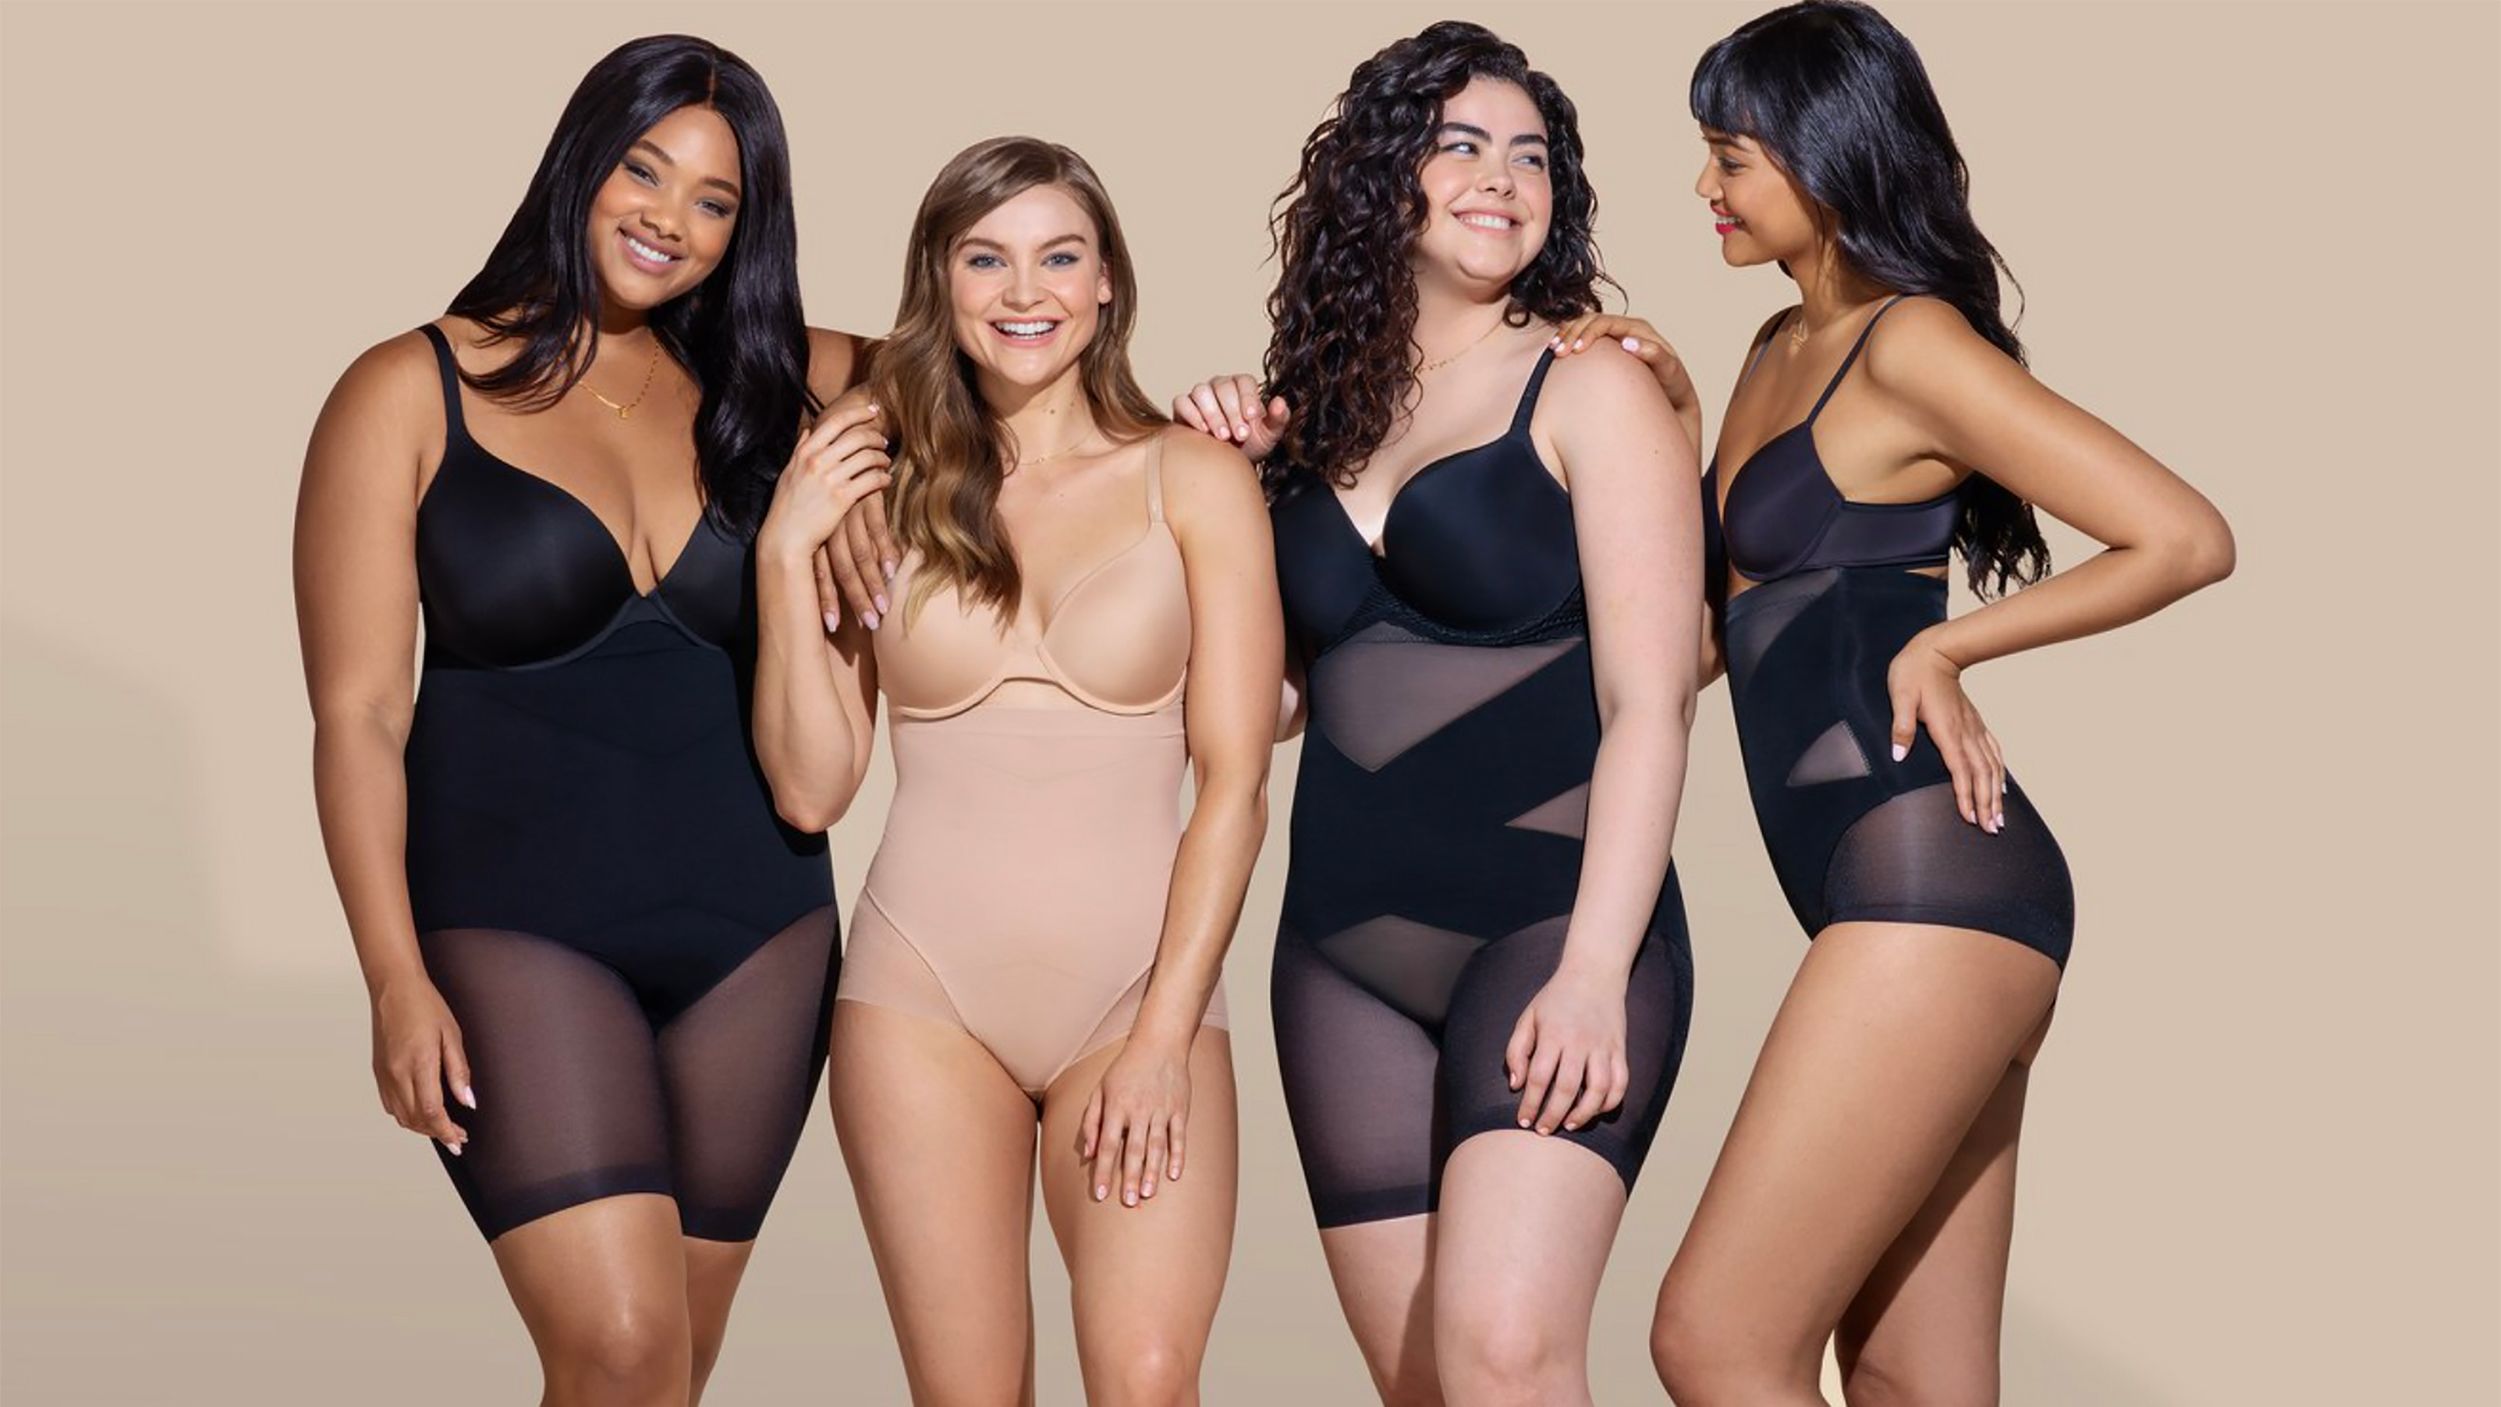 Reductress » We Tried Different Brands of Shapewear and Somehow